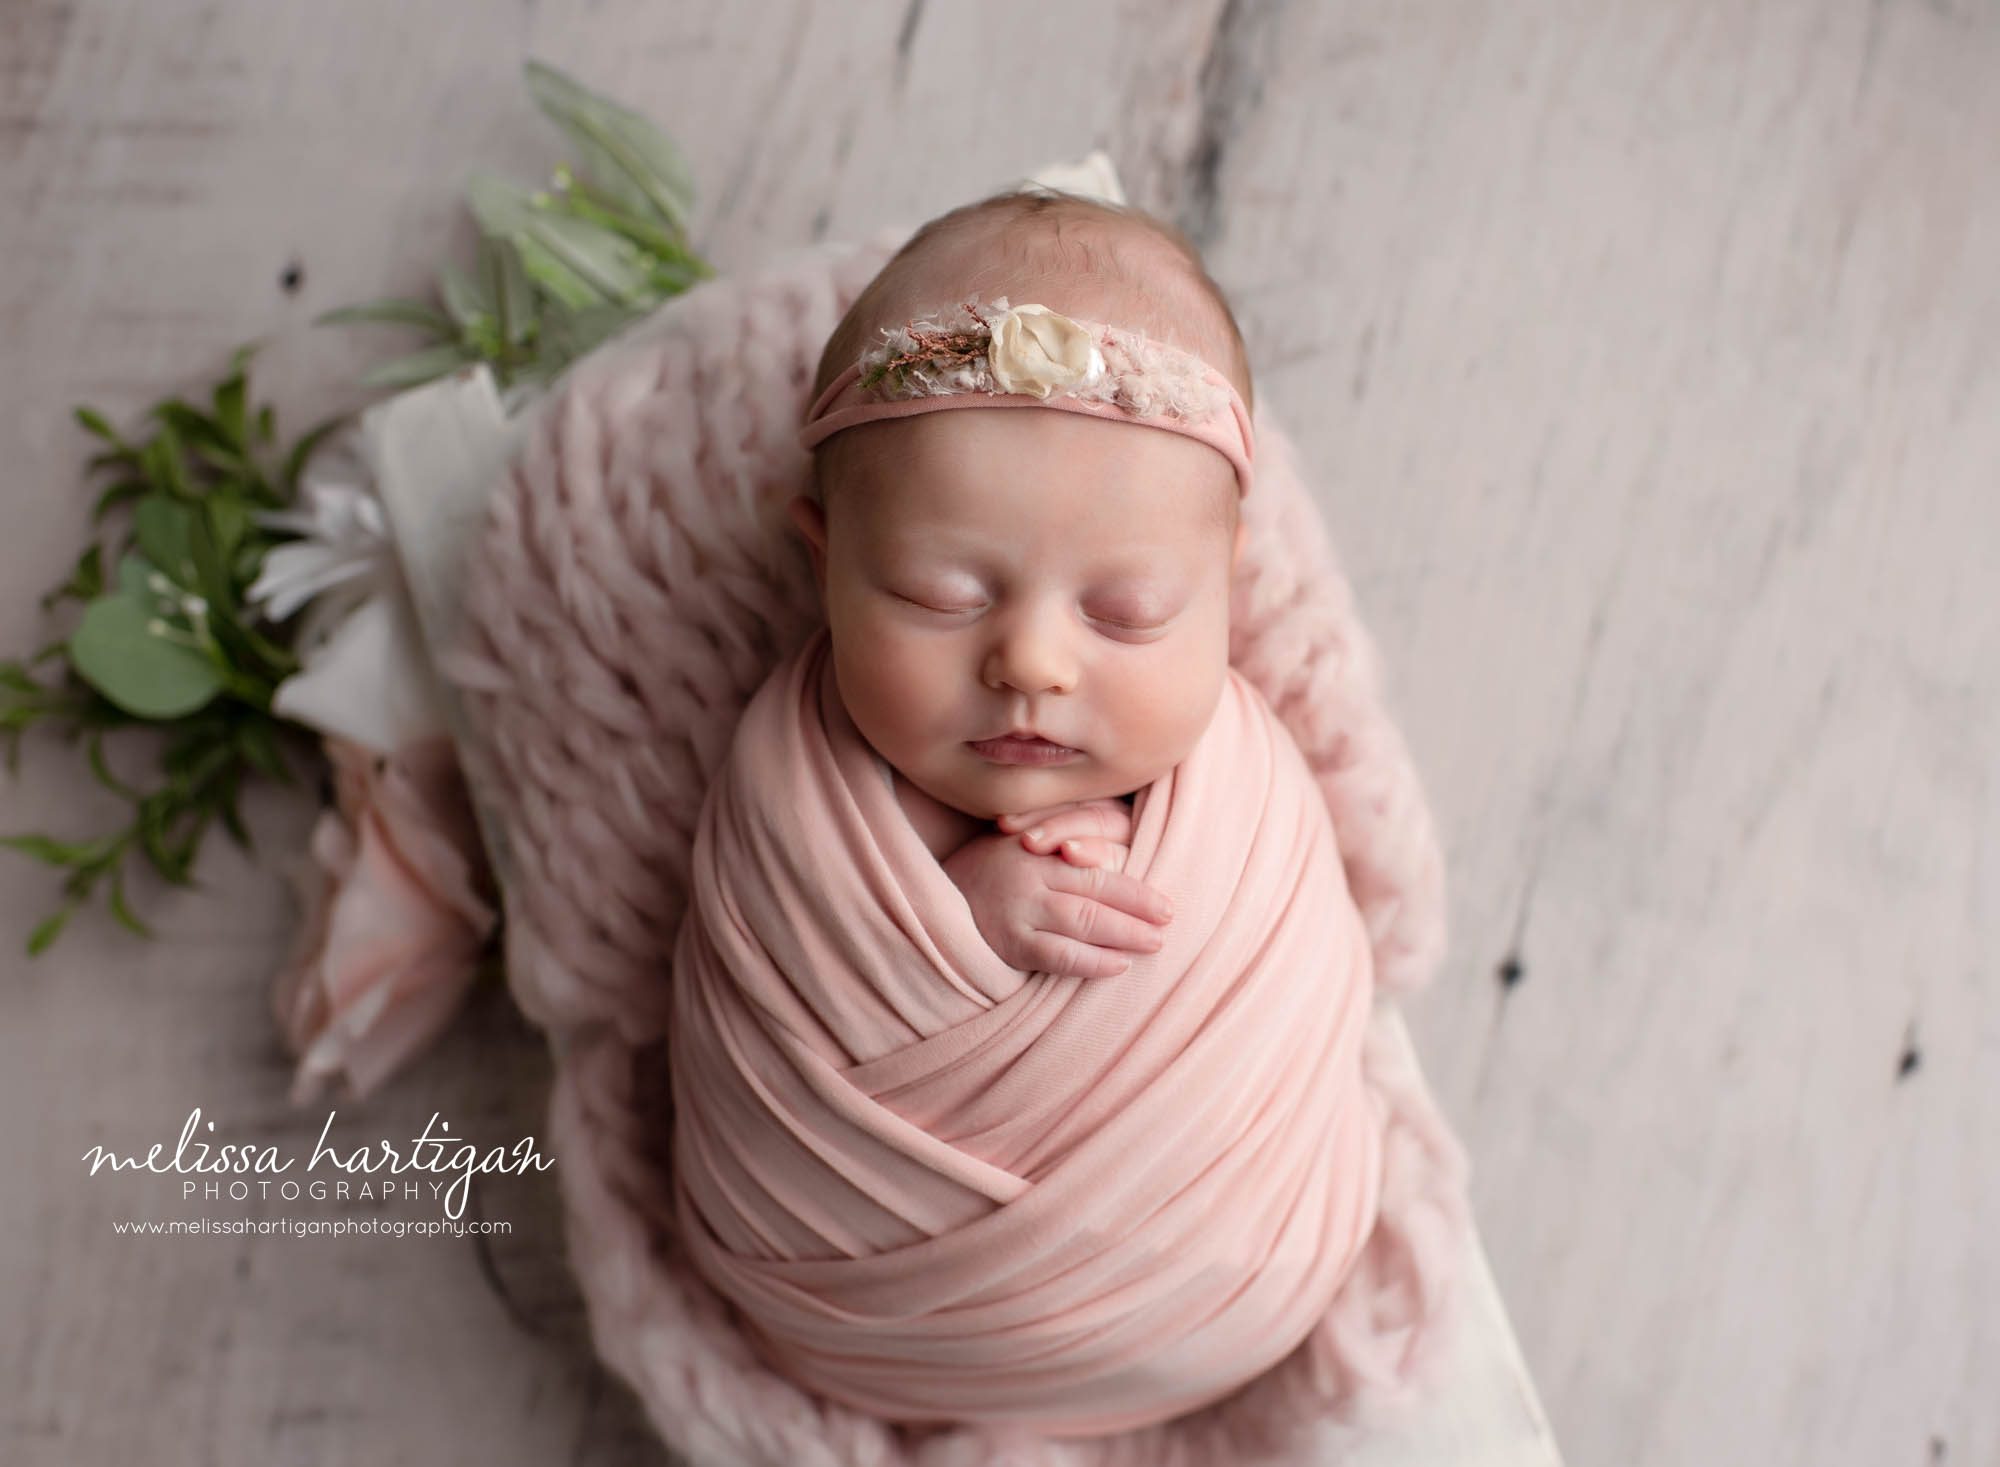 newborn baby girl posed in wooden prop swaddled in pink wrap with floral pink headband and floral elements Ct newborn photographer